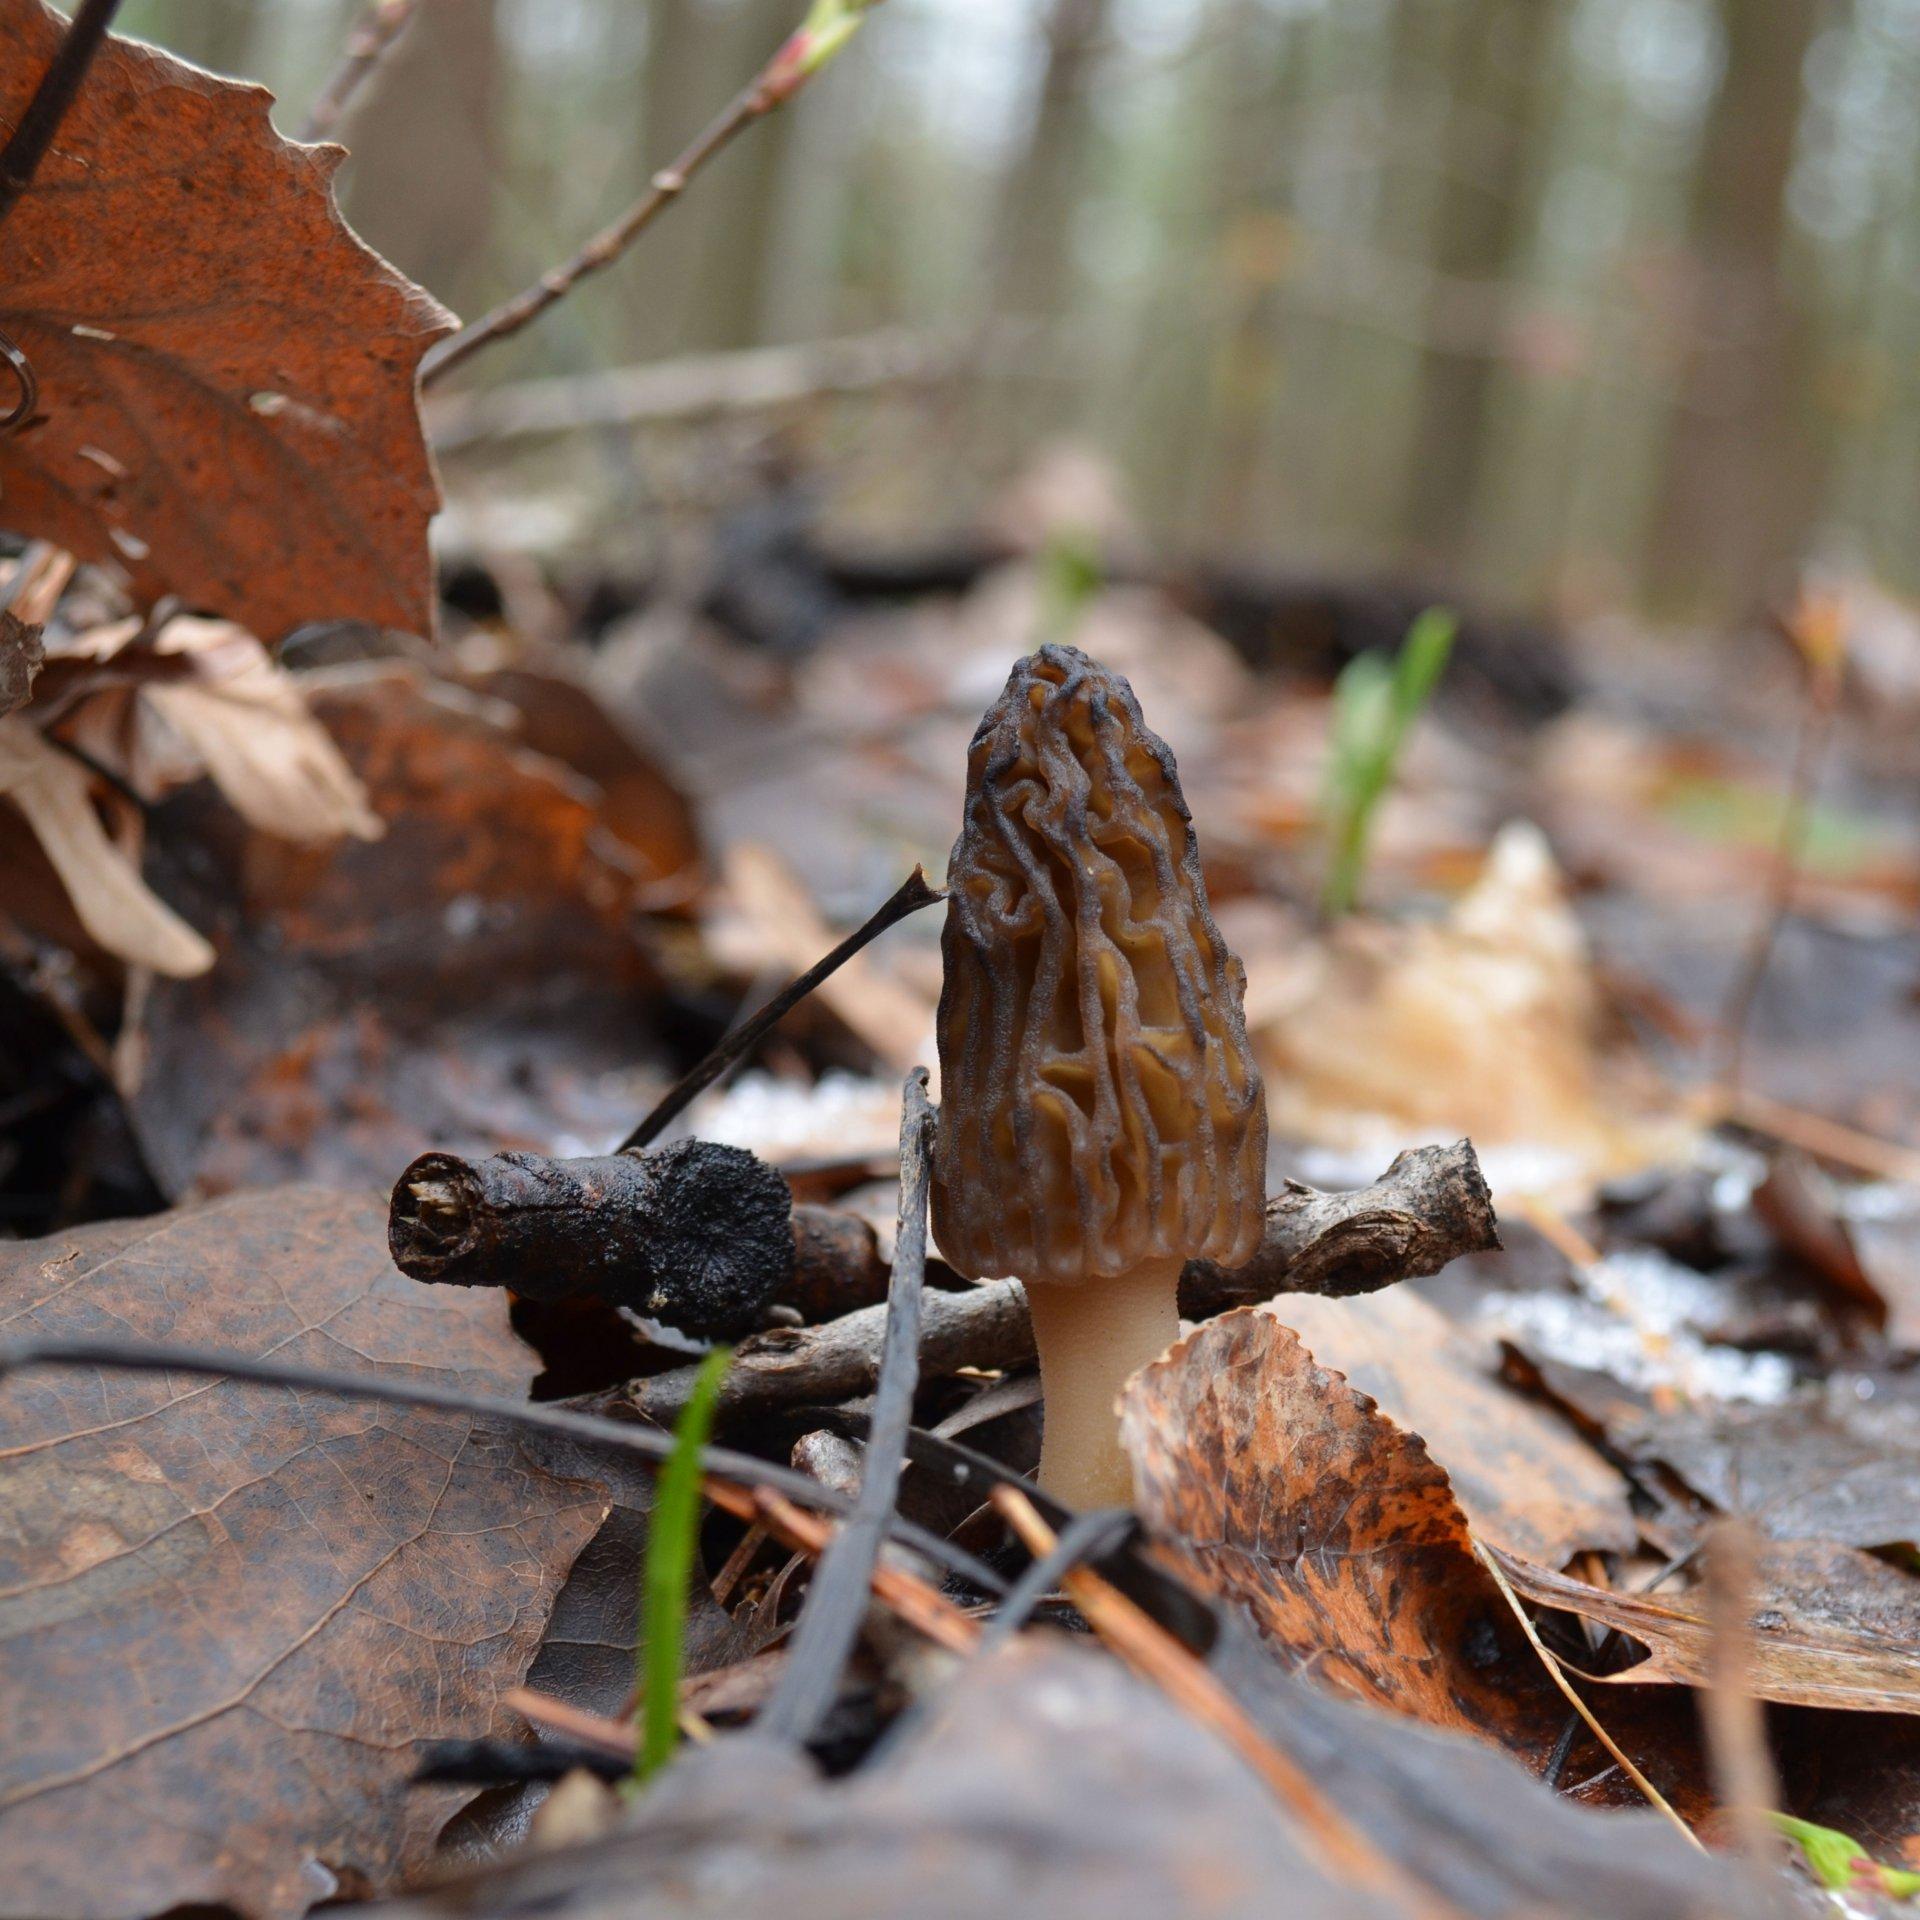 morel mushroom growing out the ground next to leaves